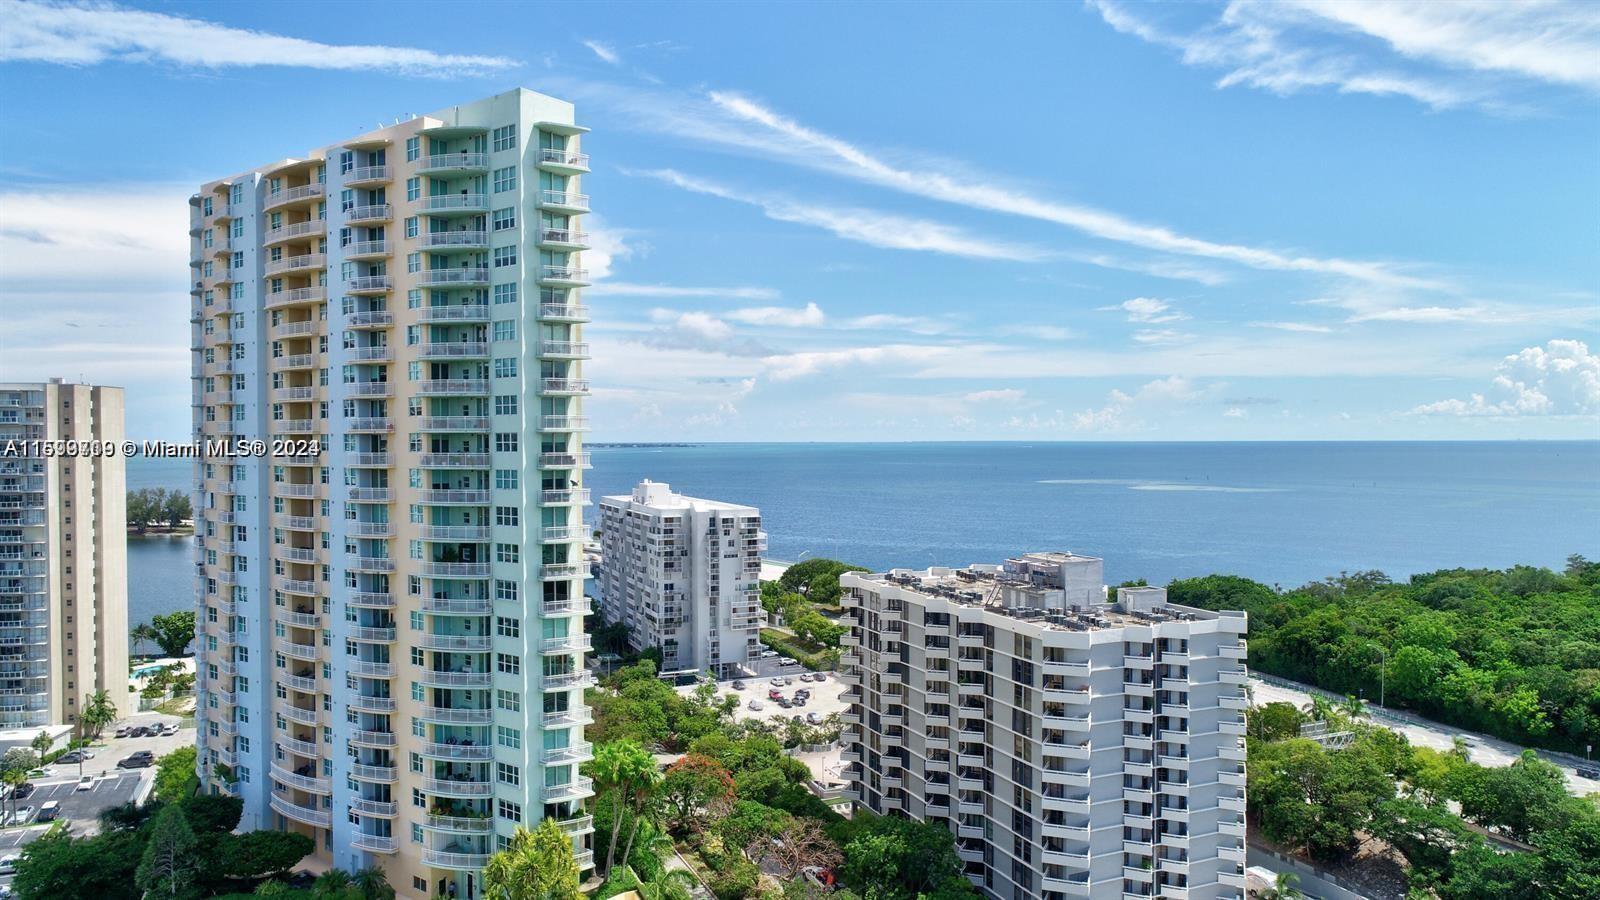 Stunning Corner Unit with Panoramic Views. Beautifully renovated 2 bed, 2 bath corner unit with spectacular views of Biscayne Bay, Vizcaya, and Key Biscayne. Features include high ceilings, marble floors, granite kitchen countertops, custom wood cabinets, remote-controlled Hunter-Douglas blinds, and new A/C unit. Enjoy two private balconies, spacious walk-in closets, and two assigned parking spaces. Building amenities: 24-hour security, free valet parking, pool, sauna, gym, business center, kids playground, washer and dryer in the unit, business center basic cable included in rent, business center, party room with kitchen and much more. Prime Brickell location, walking distance to downtown and restaurants.